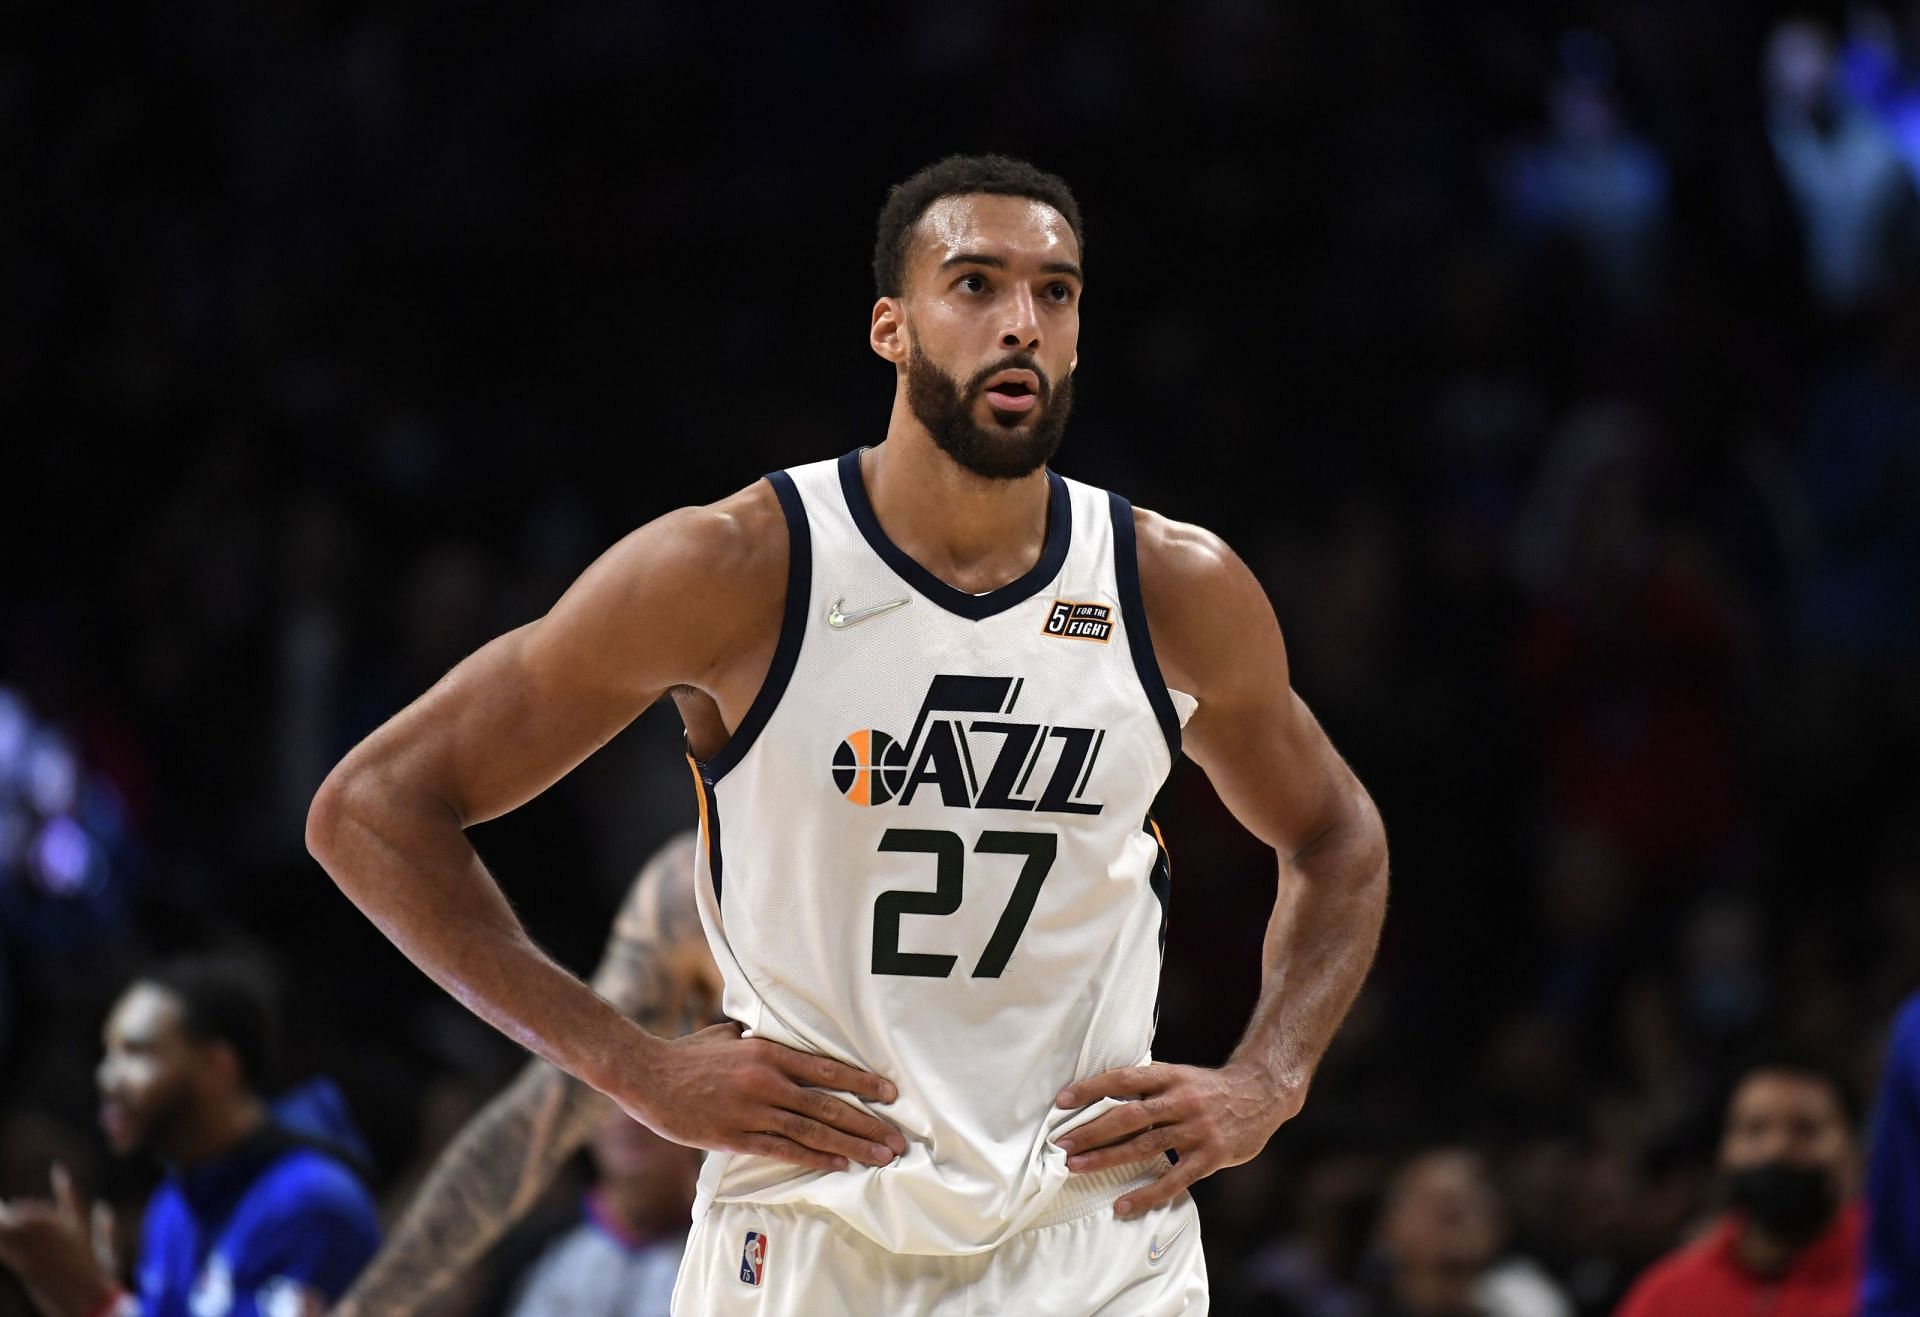 Utah Jazz All-Star center Rudy Gobert could be on the trading block in the offseason. [Photo: Hoops Habit]